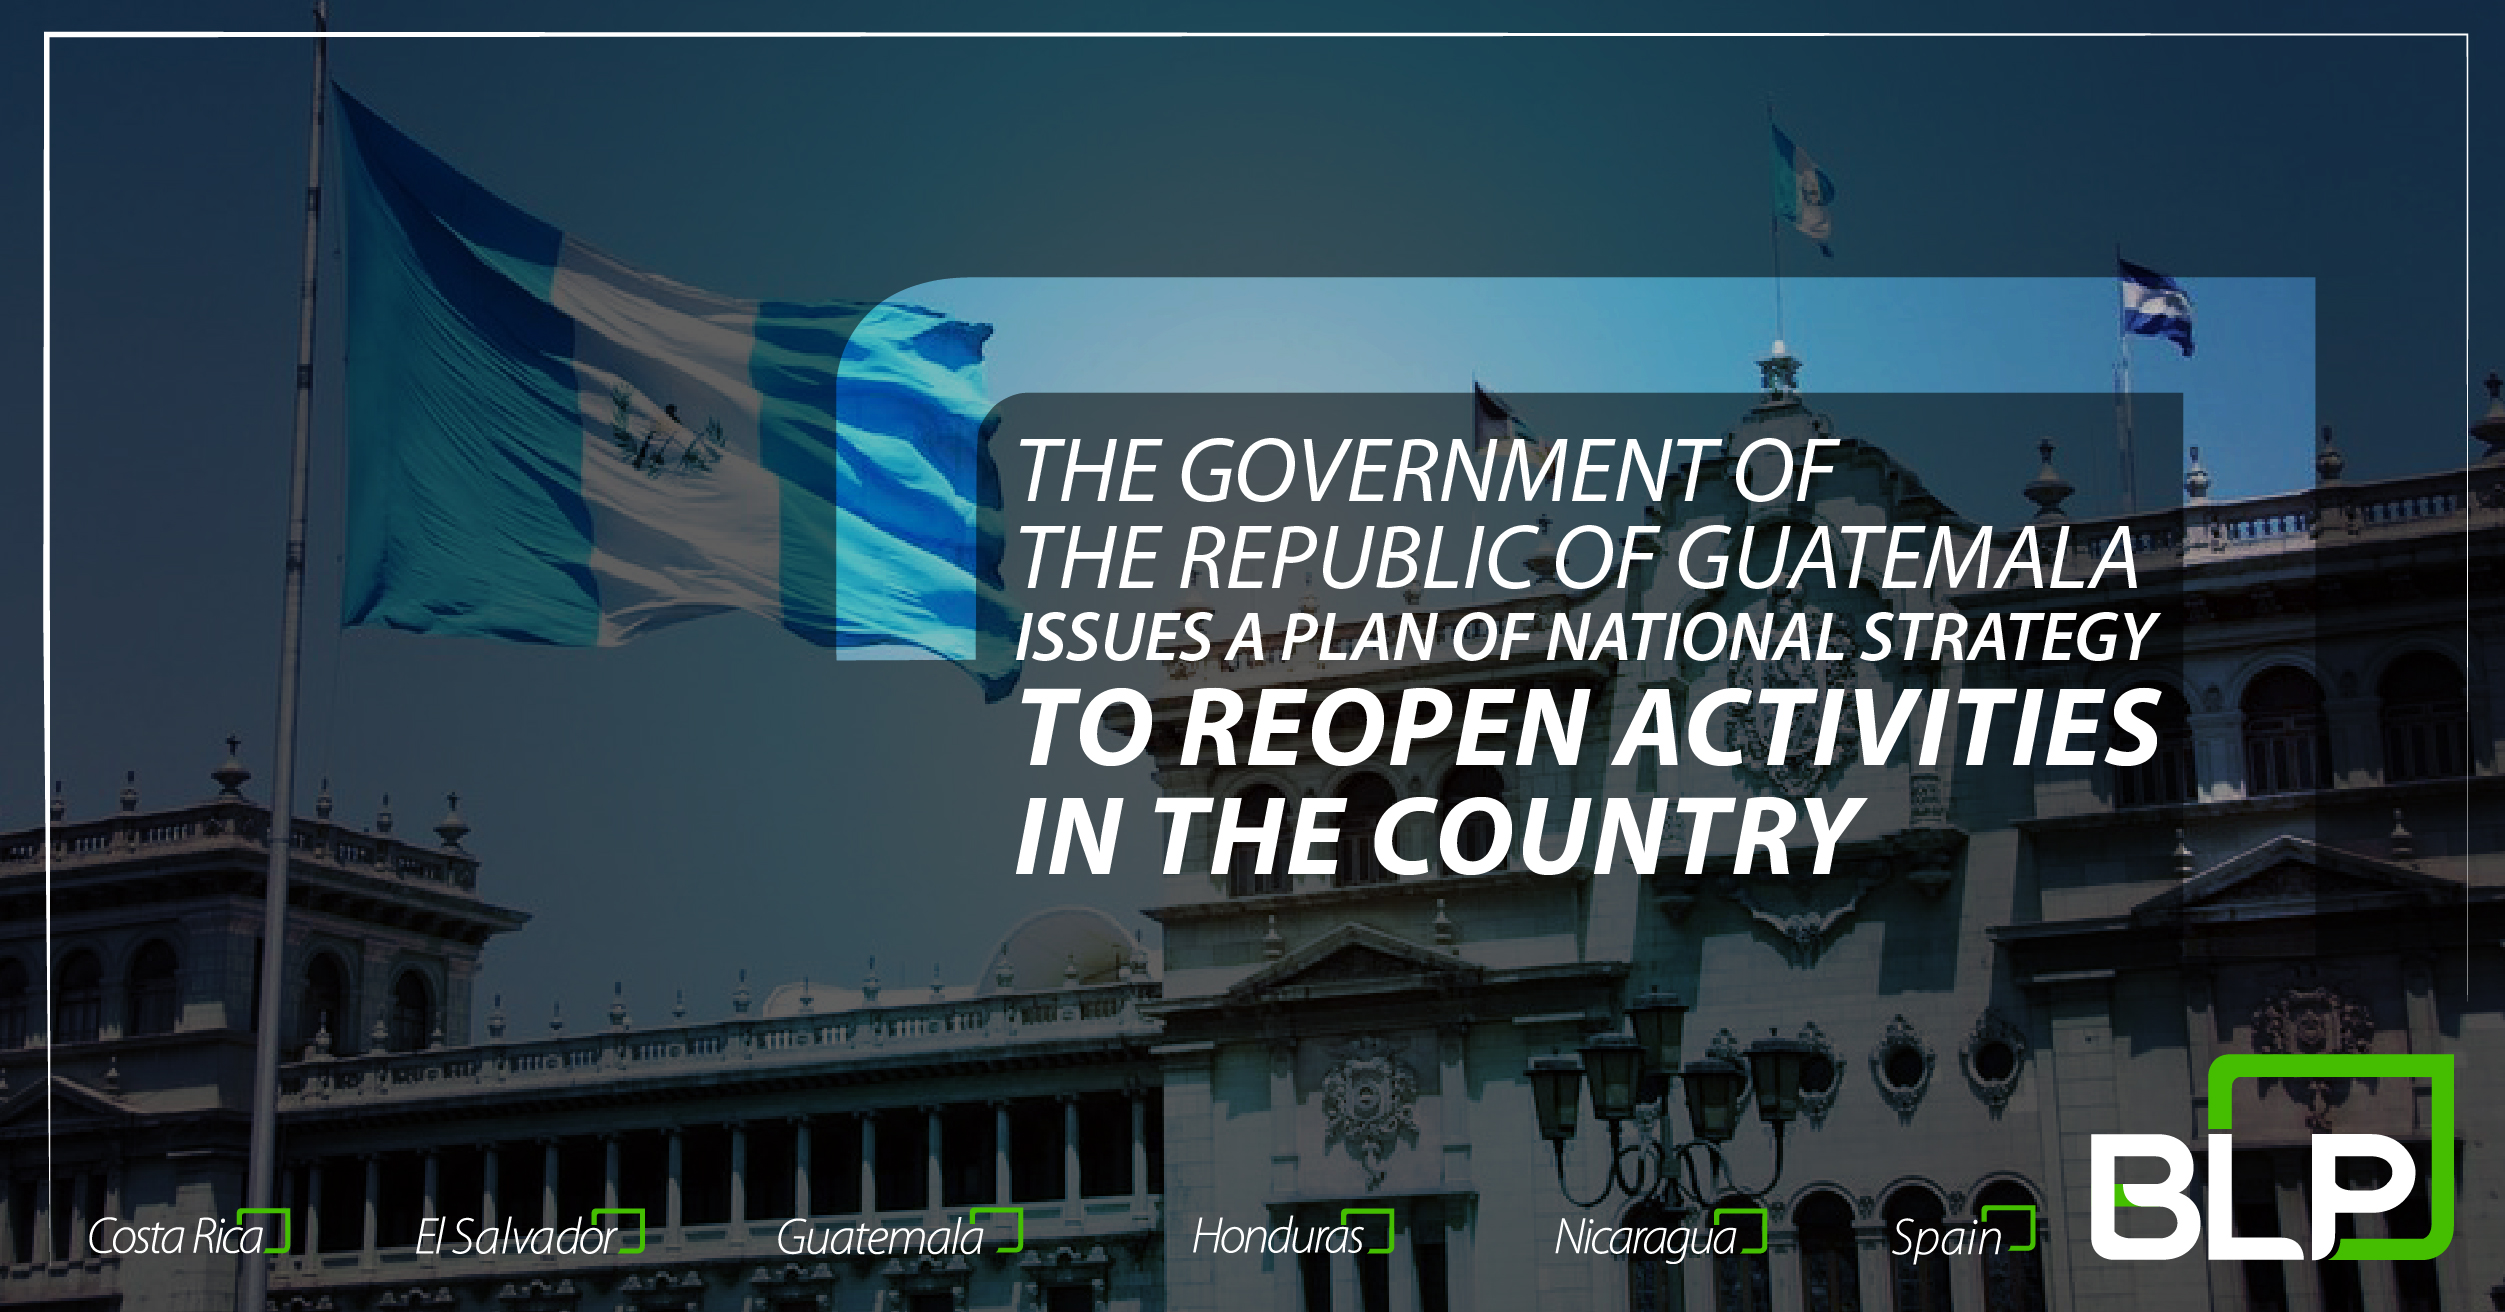 The Government of the Republic of Guatemala issues a Plan of National Strategy to reopen activities in the country